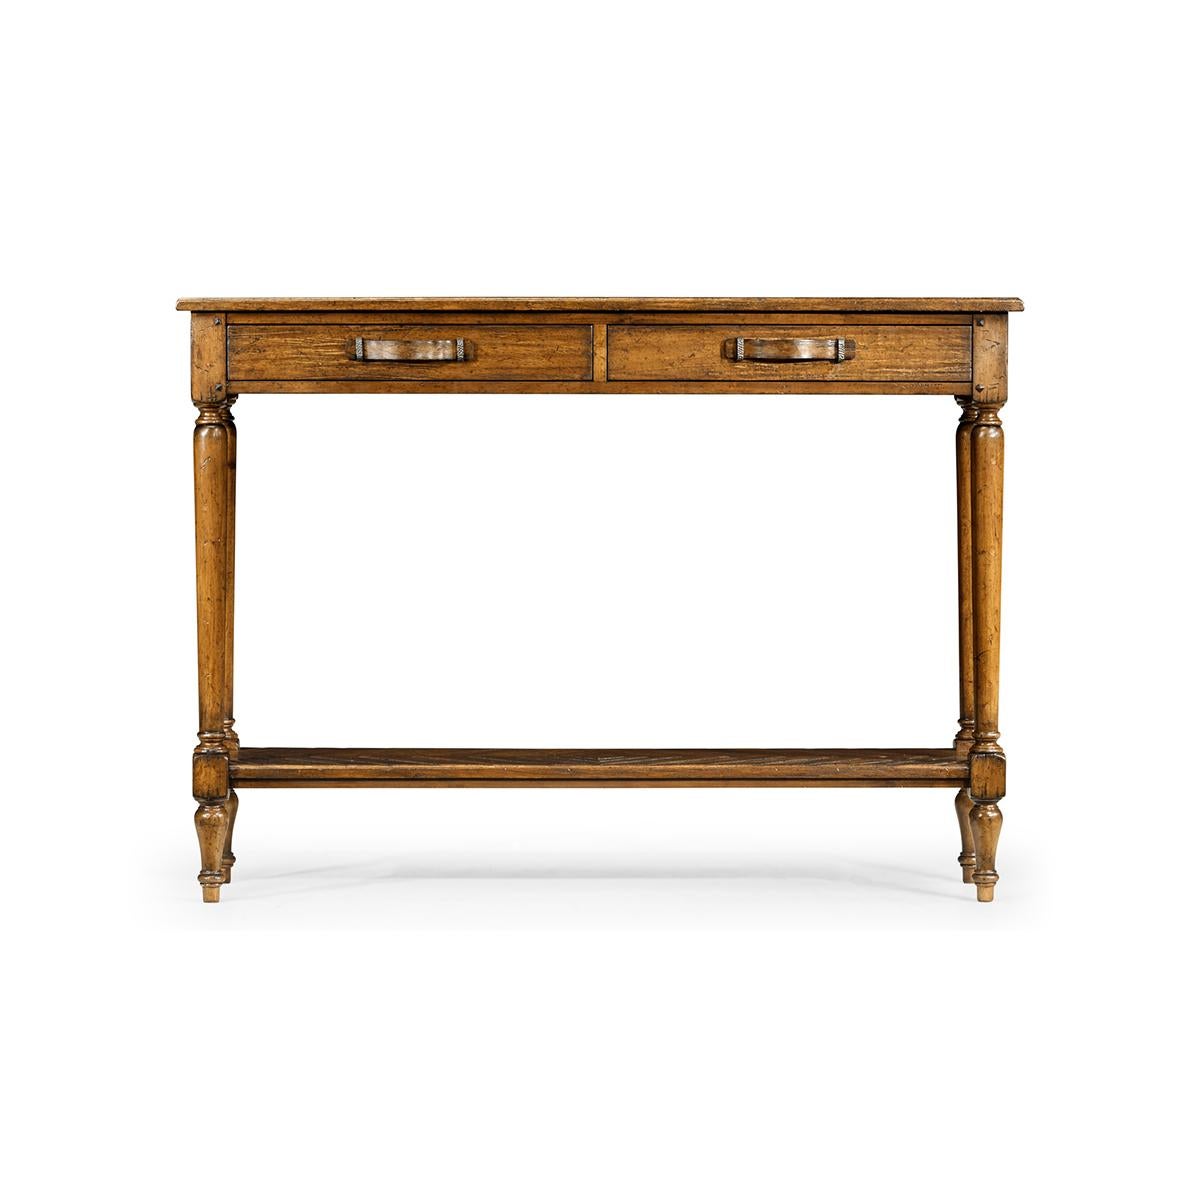 French Provincial console table, with a heavily distressed country walnut finish, this parquet top console has two drawers and under-tier. Bentwood and iron handles contrasting dark geometric inlay to panels. Raised on turned and tapered